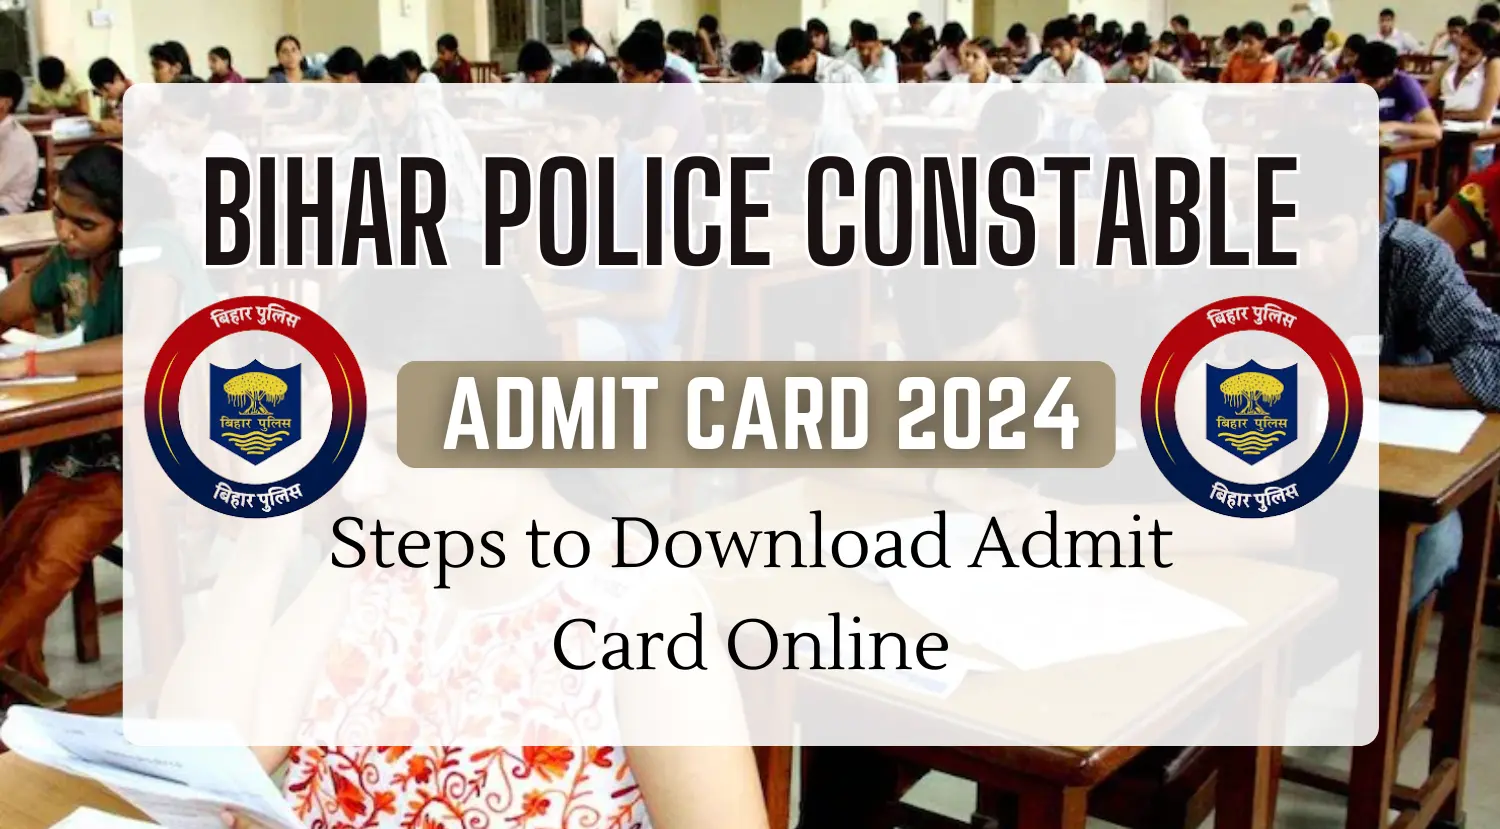 Bihar Police Constable Admit Card 2024 - Steps to Download Admit Card Online